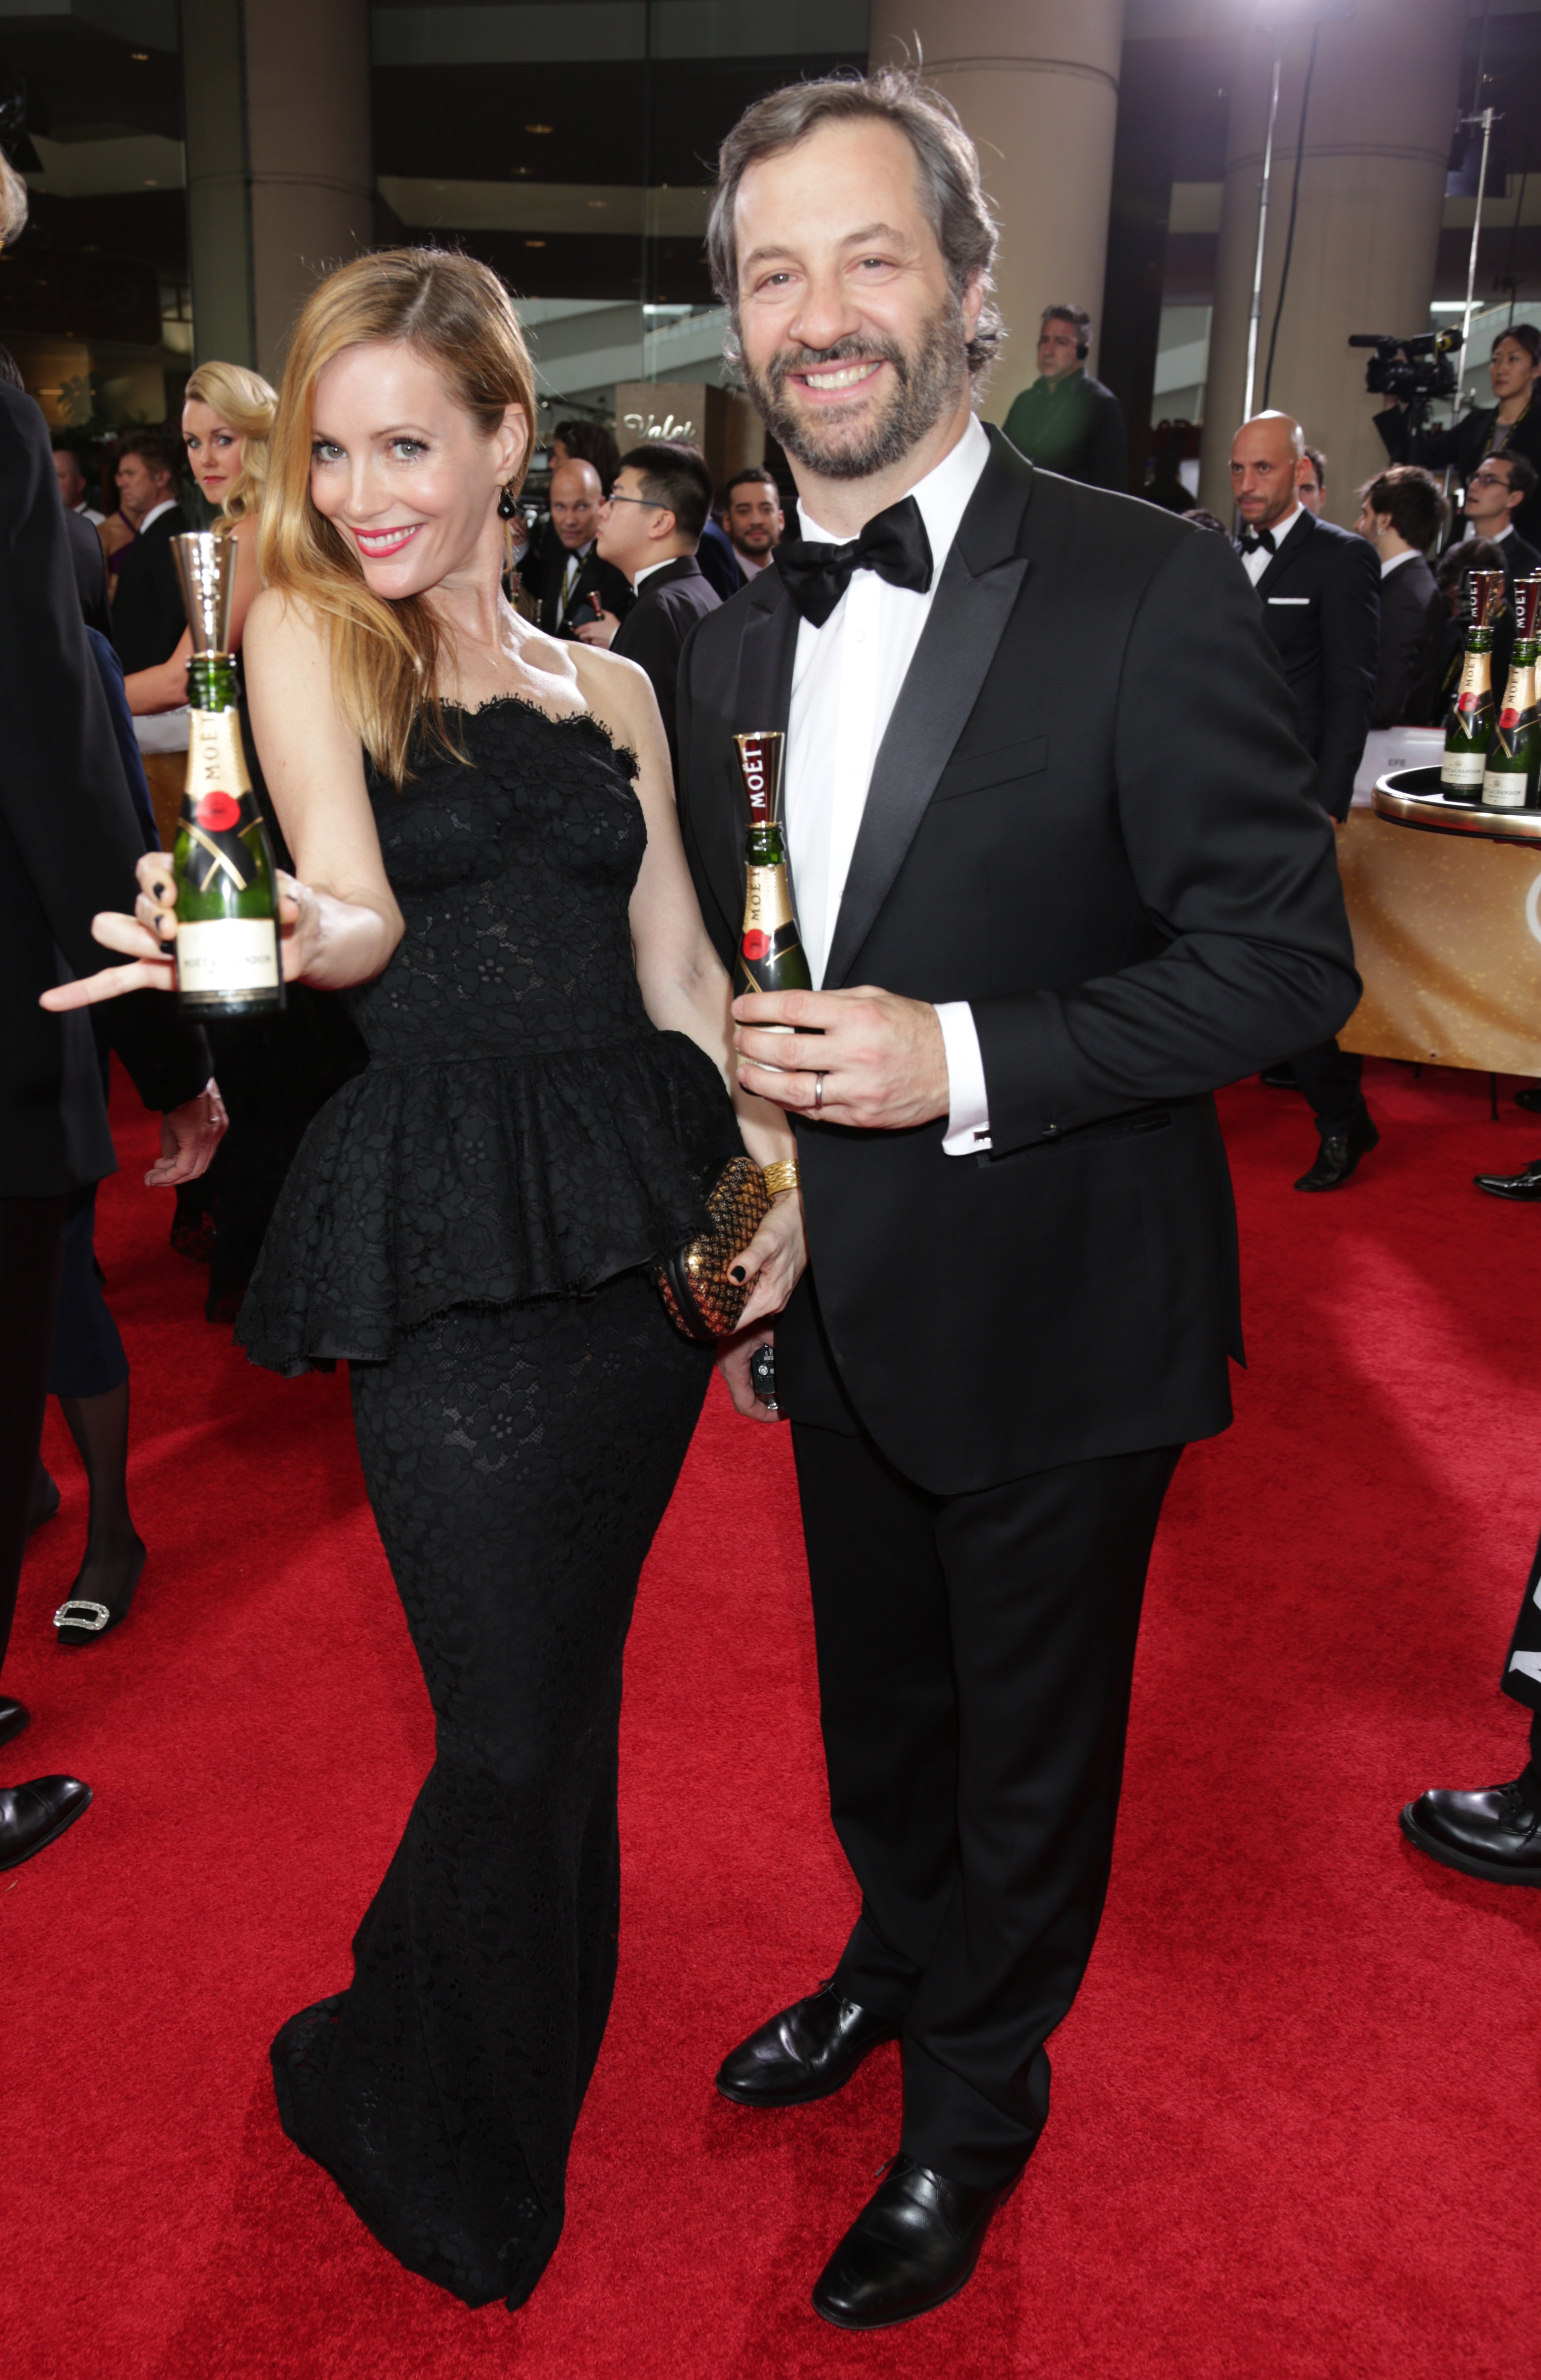 Leslie Mann and Judd Apatow with Moët & Chandon at the 71th Annual Golden Globe Awards Red Carpet at the Beverly Hilton in Beverly Hills on Sunday, January 12, 2014(Photo: Alex J. Berliner / ABImages)